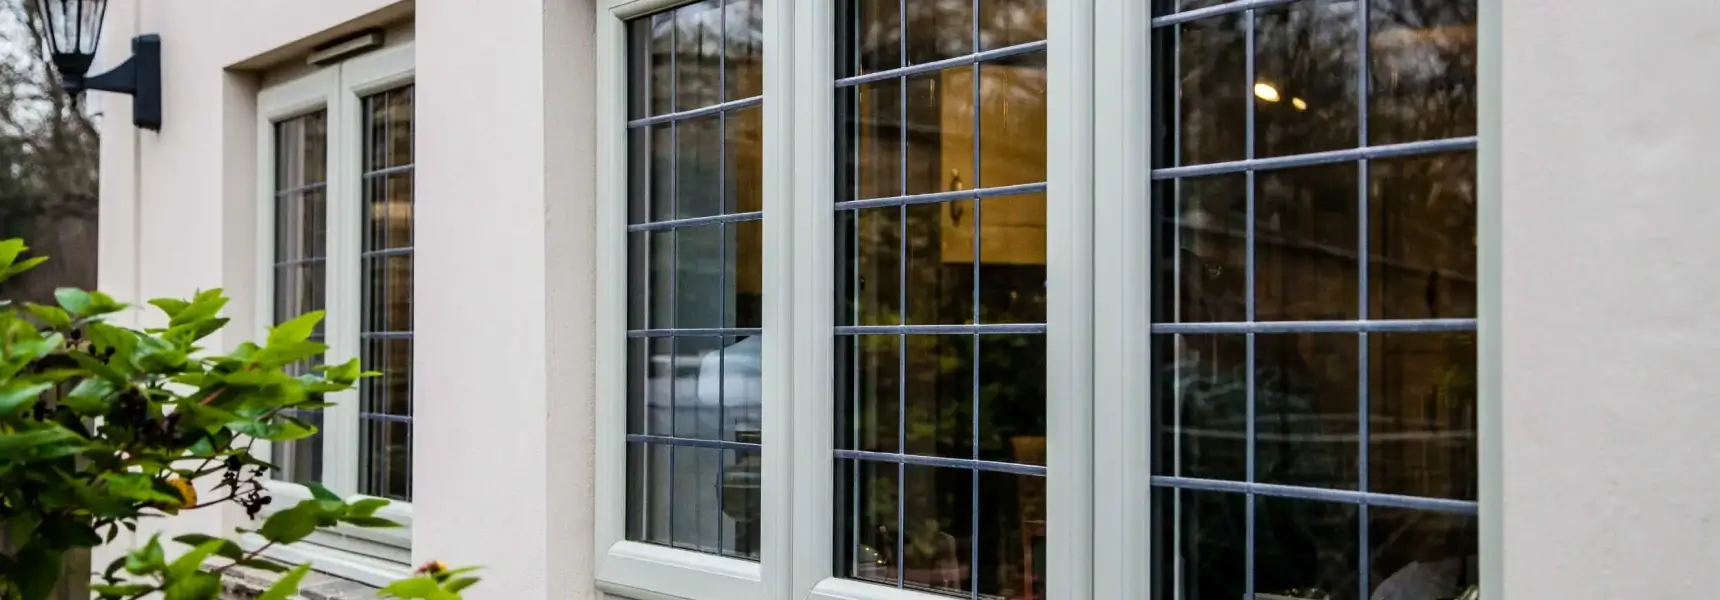 How Double-Glazed Windows Can Protect Your House from Intruders?